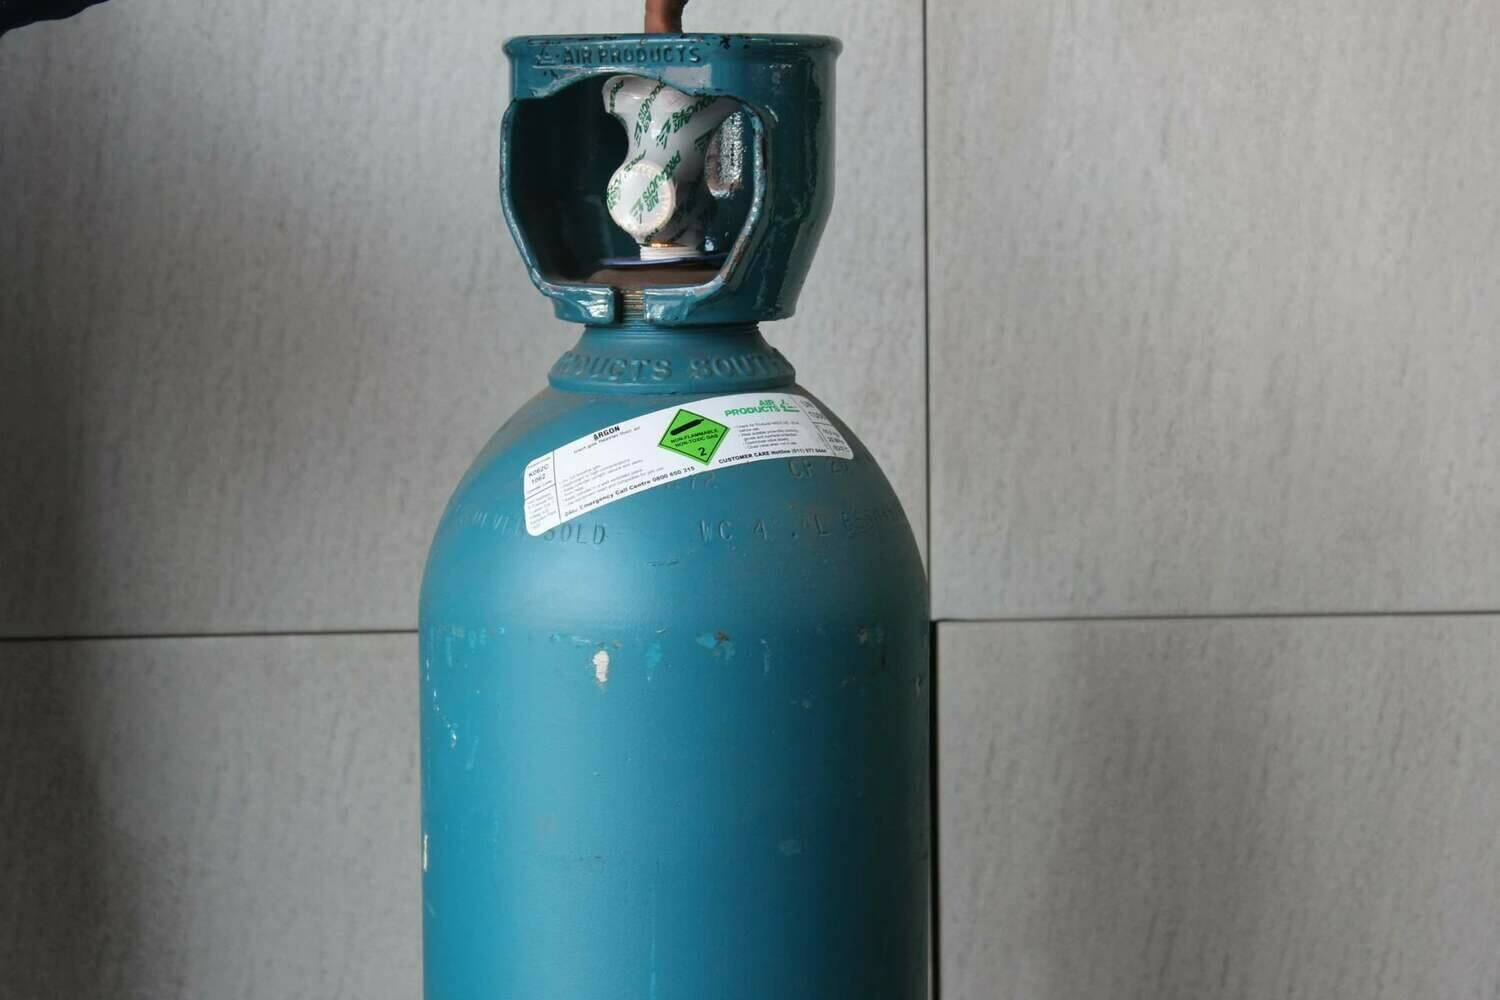 9kg gas cylinder is the most convenient cylinder size to easily refill and use